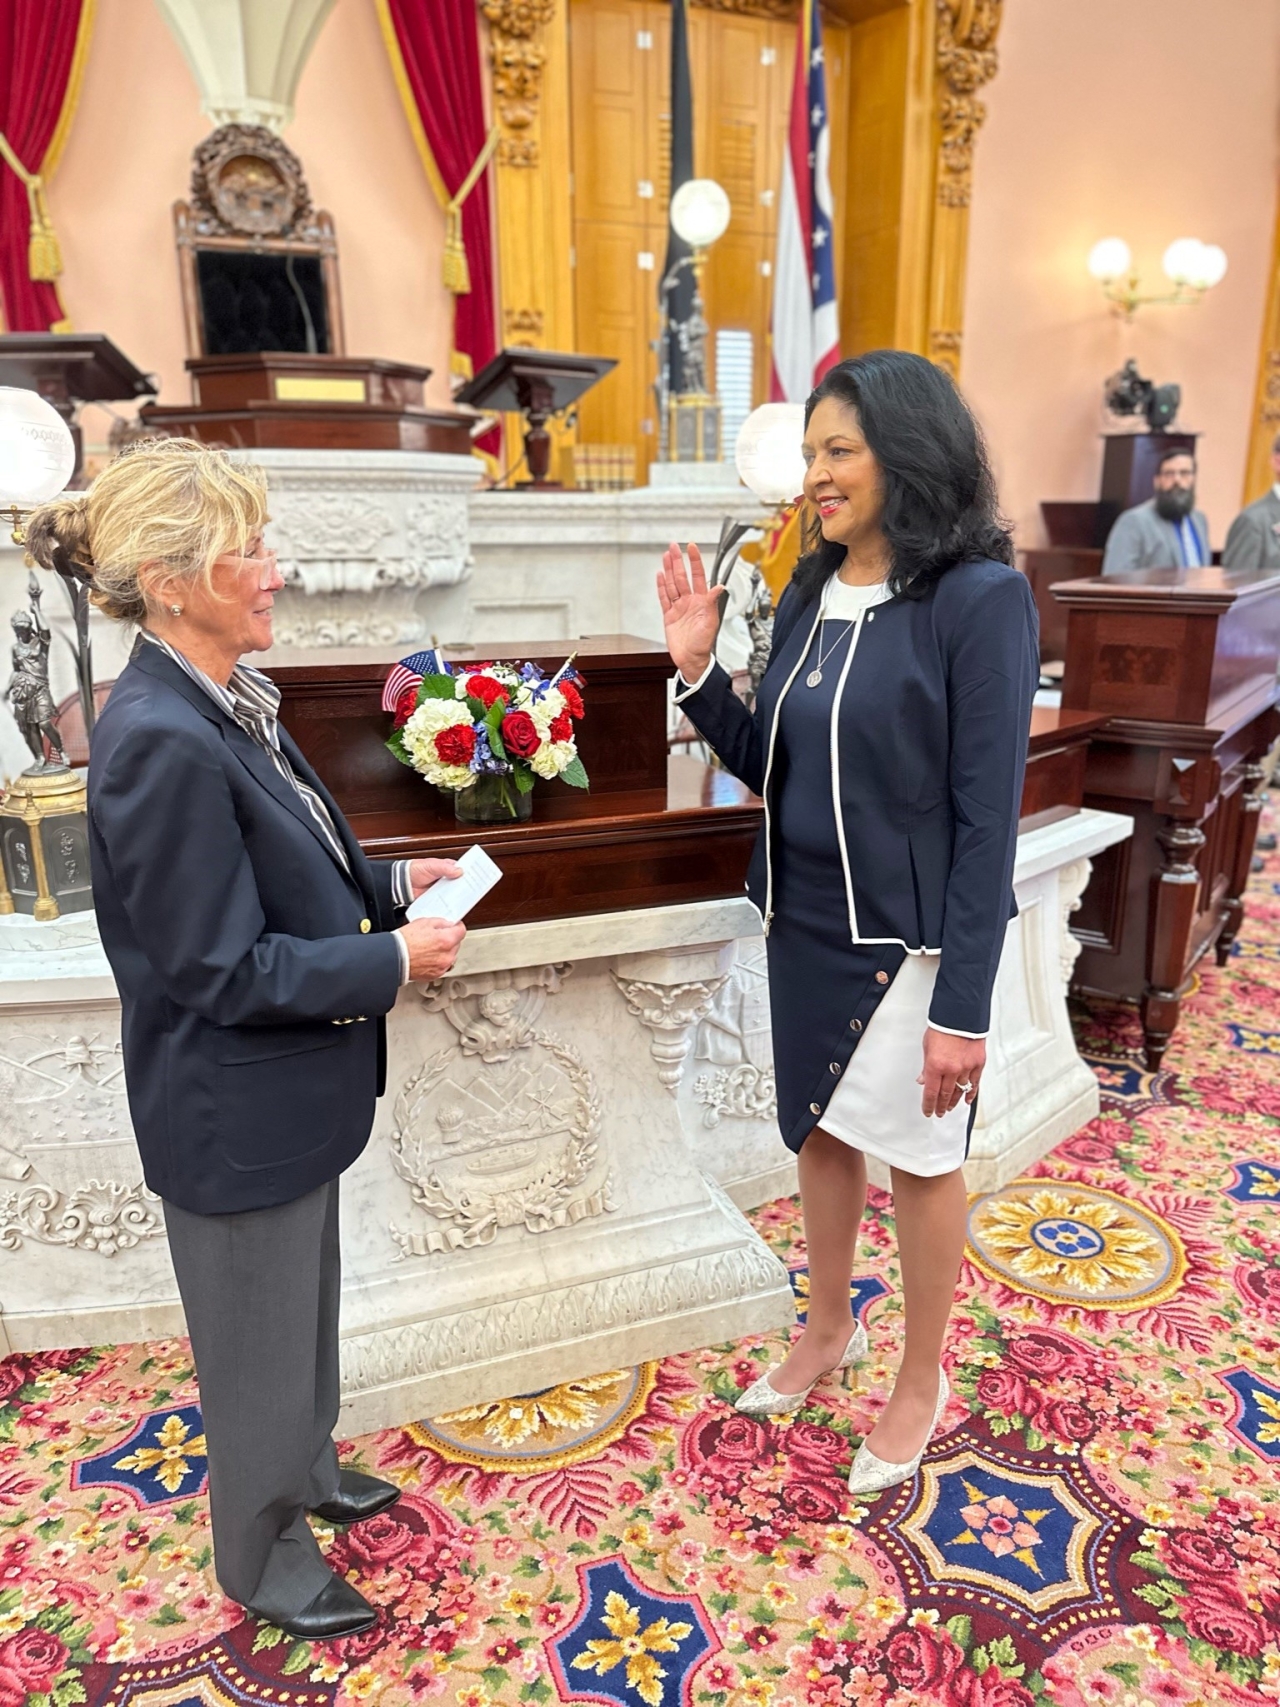 Rep. Somani is sworn in as the State Representative for District 11 in the 135th General Assembly